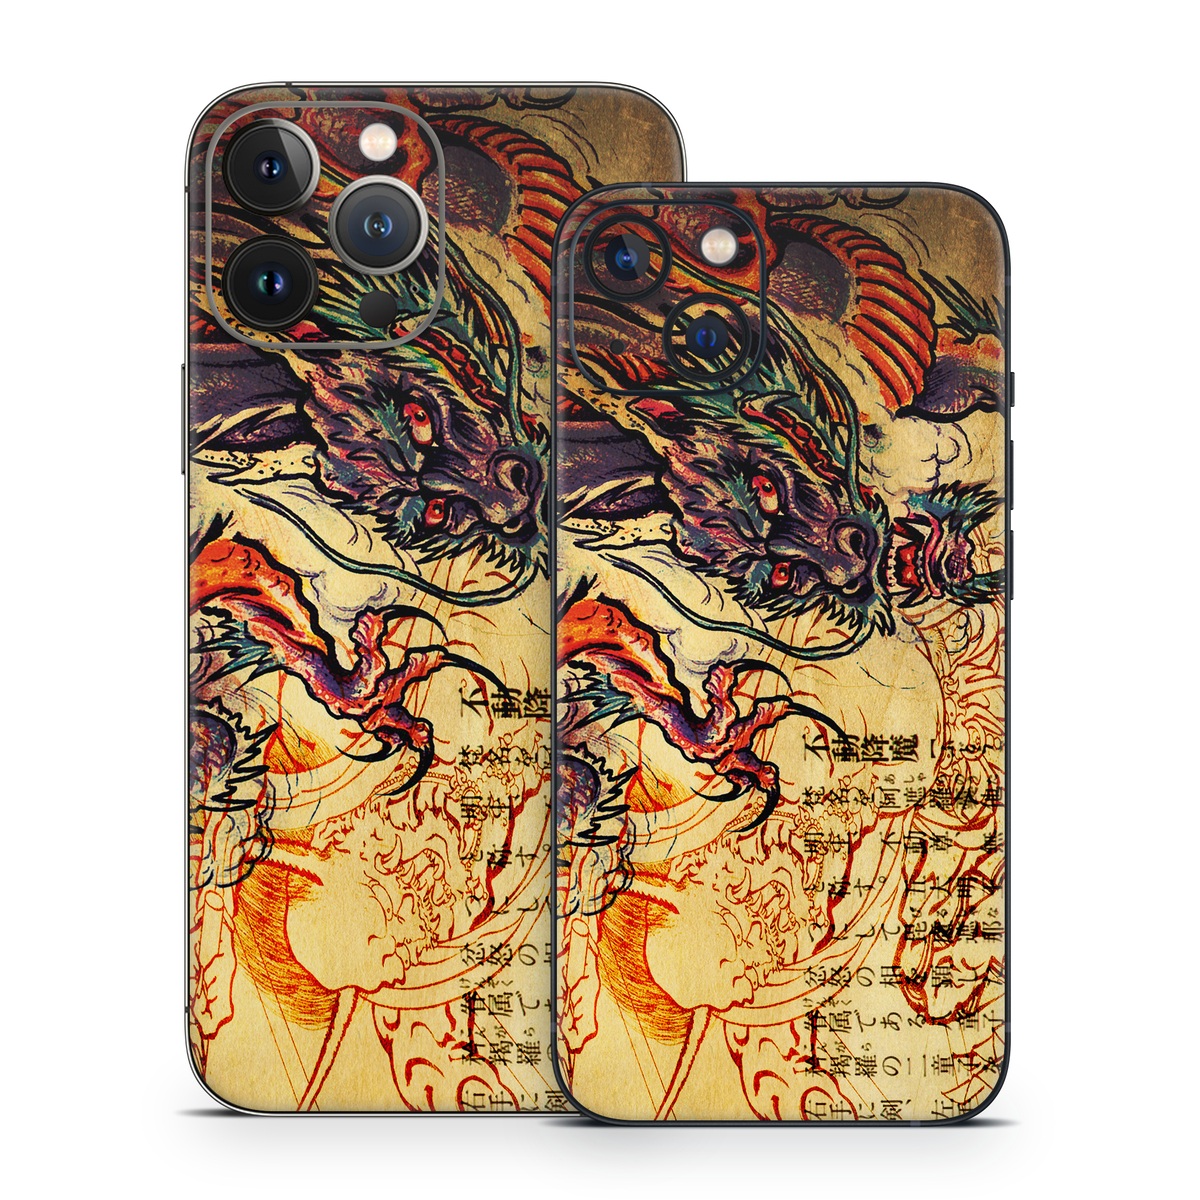 iPhone 13 Series Skin design of Illustration, Fictional character, Art, Demon, Drawing, Visual arts, Dragon, Supernatural creature, Mythical creature, Mythology, with black, green, red, gray, pink, orange colors